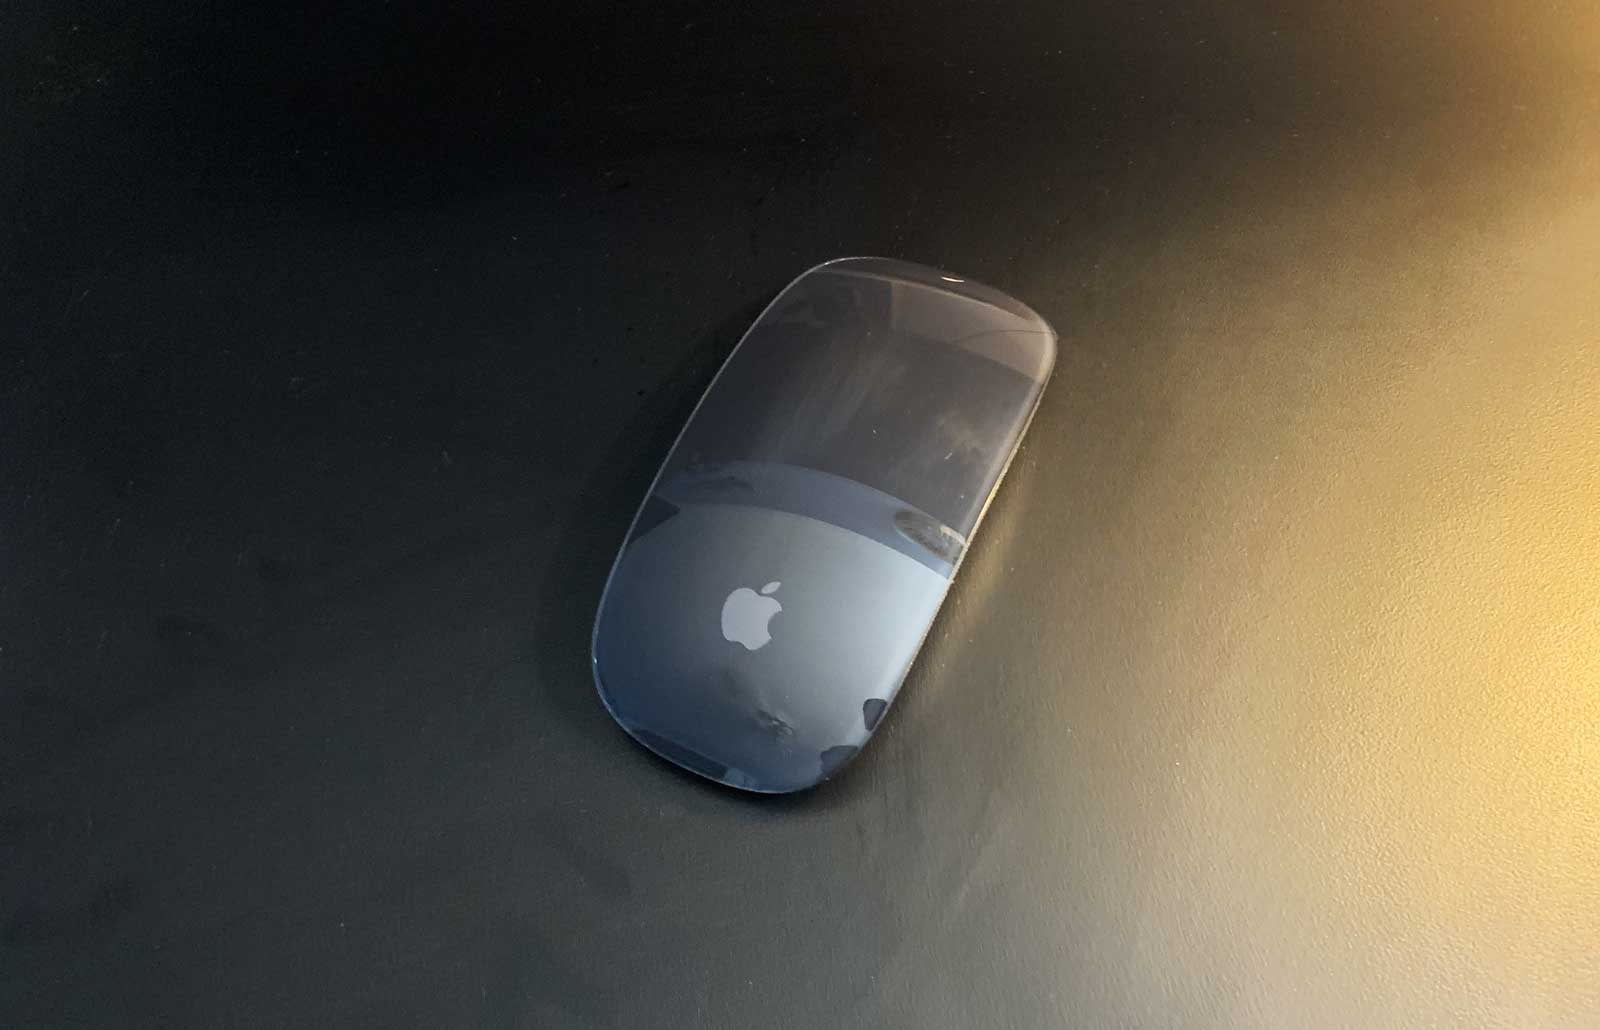 Do I need to turn off my apple wireless mouse when I’m not using it?